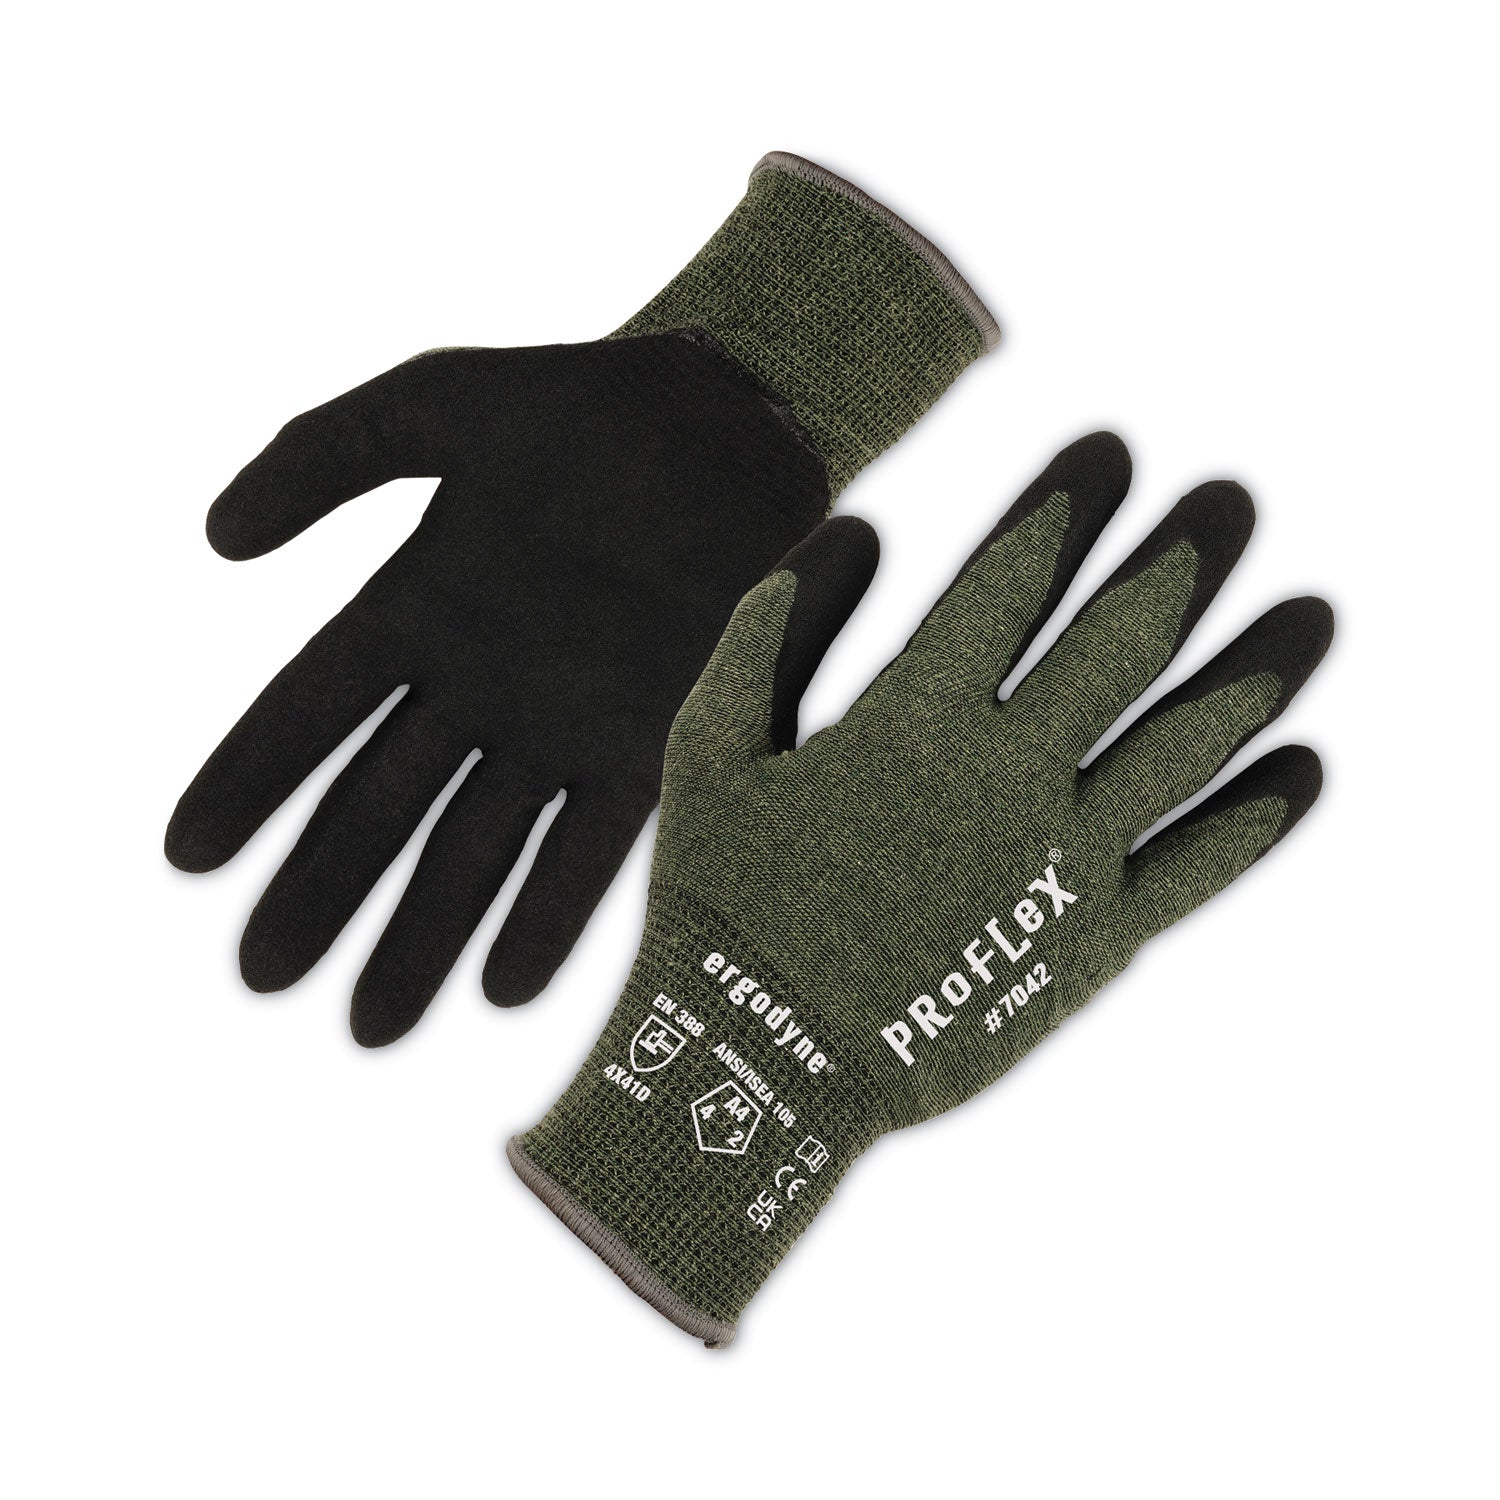 proflex-7042-ansi-a4-nitrile-coated-cr-gloves-green-x-large-12-pairs-pack-ships-in-1-3-business-days_ego10335 - 1